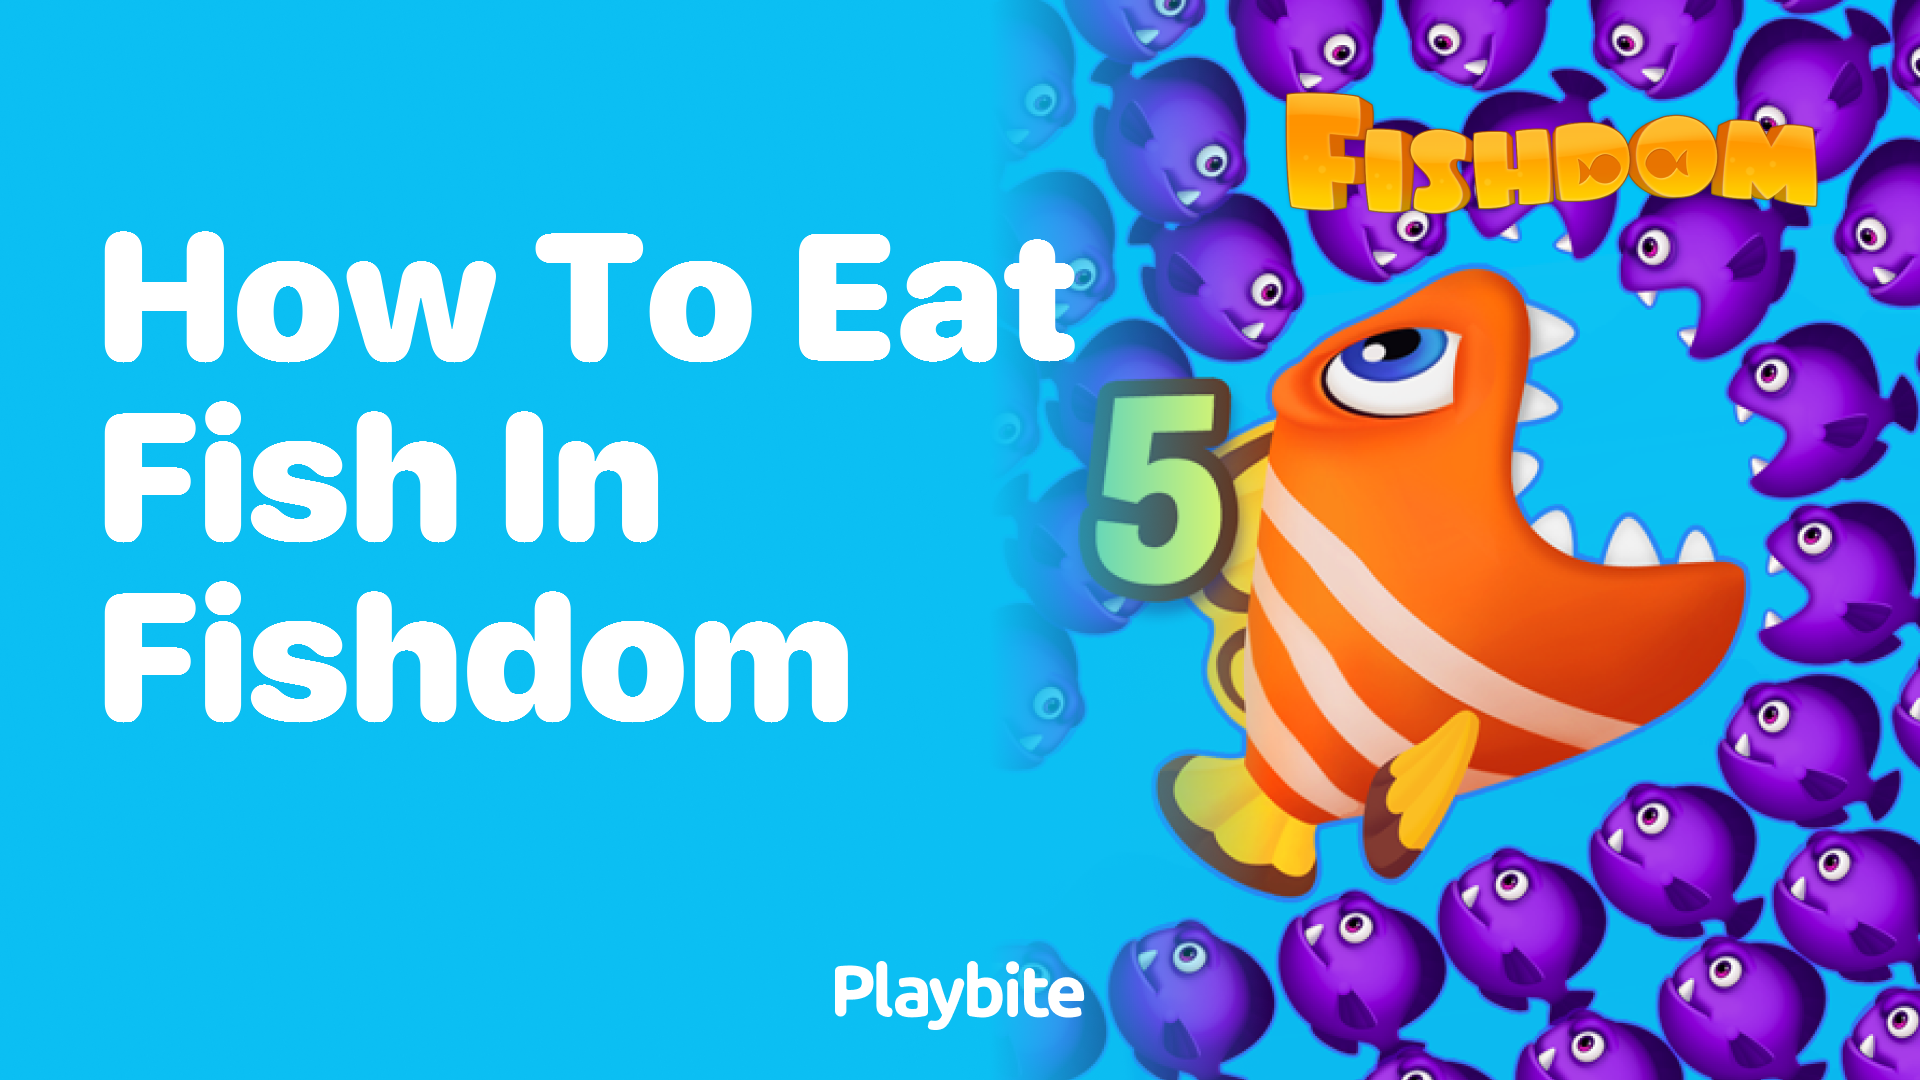 How to Eat Fish in Fishdom: Unpacking the Misconception